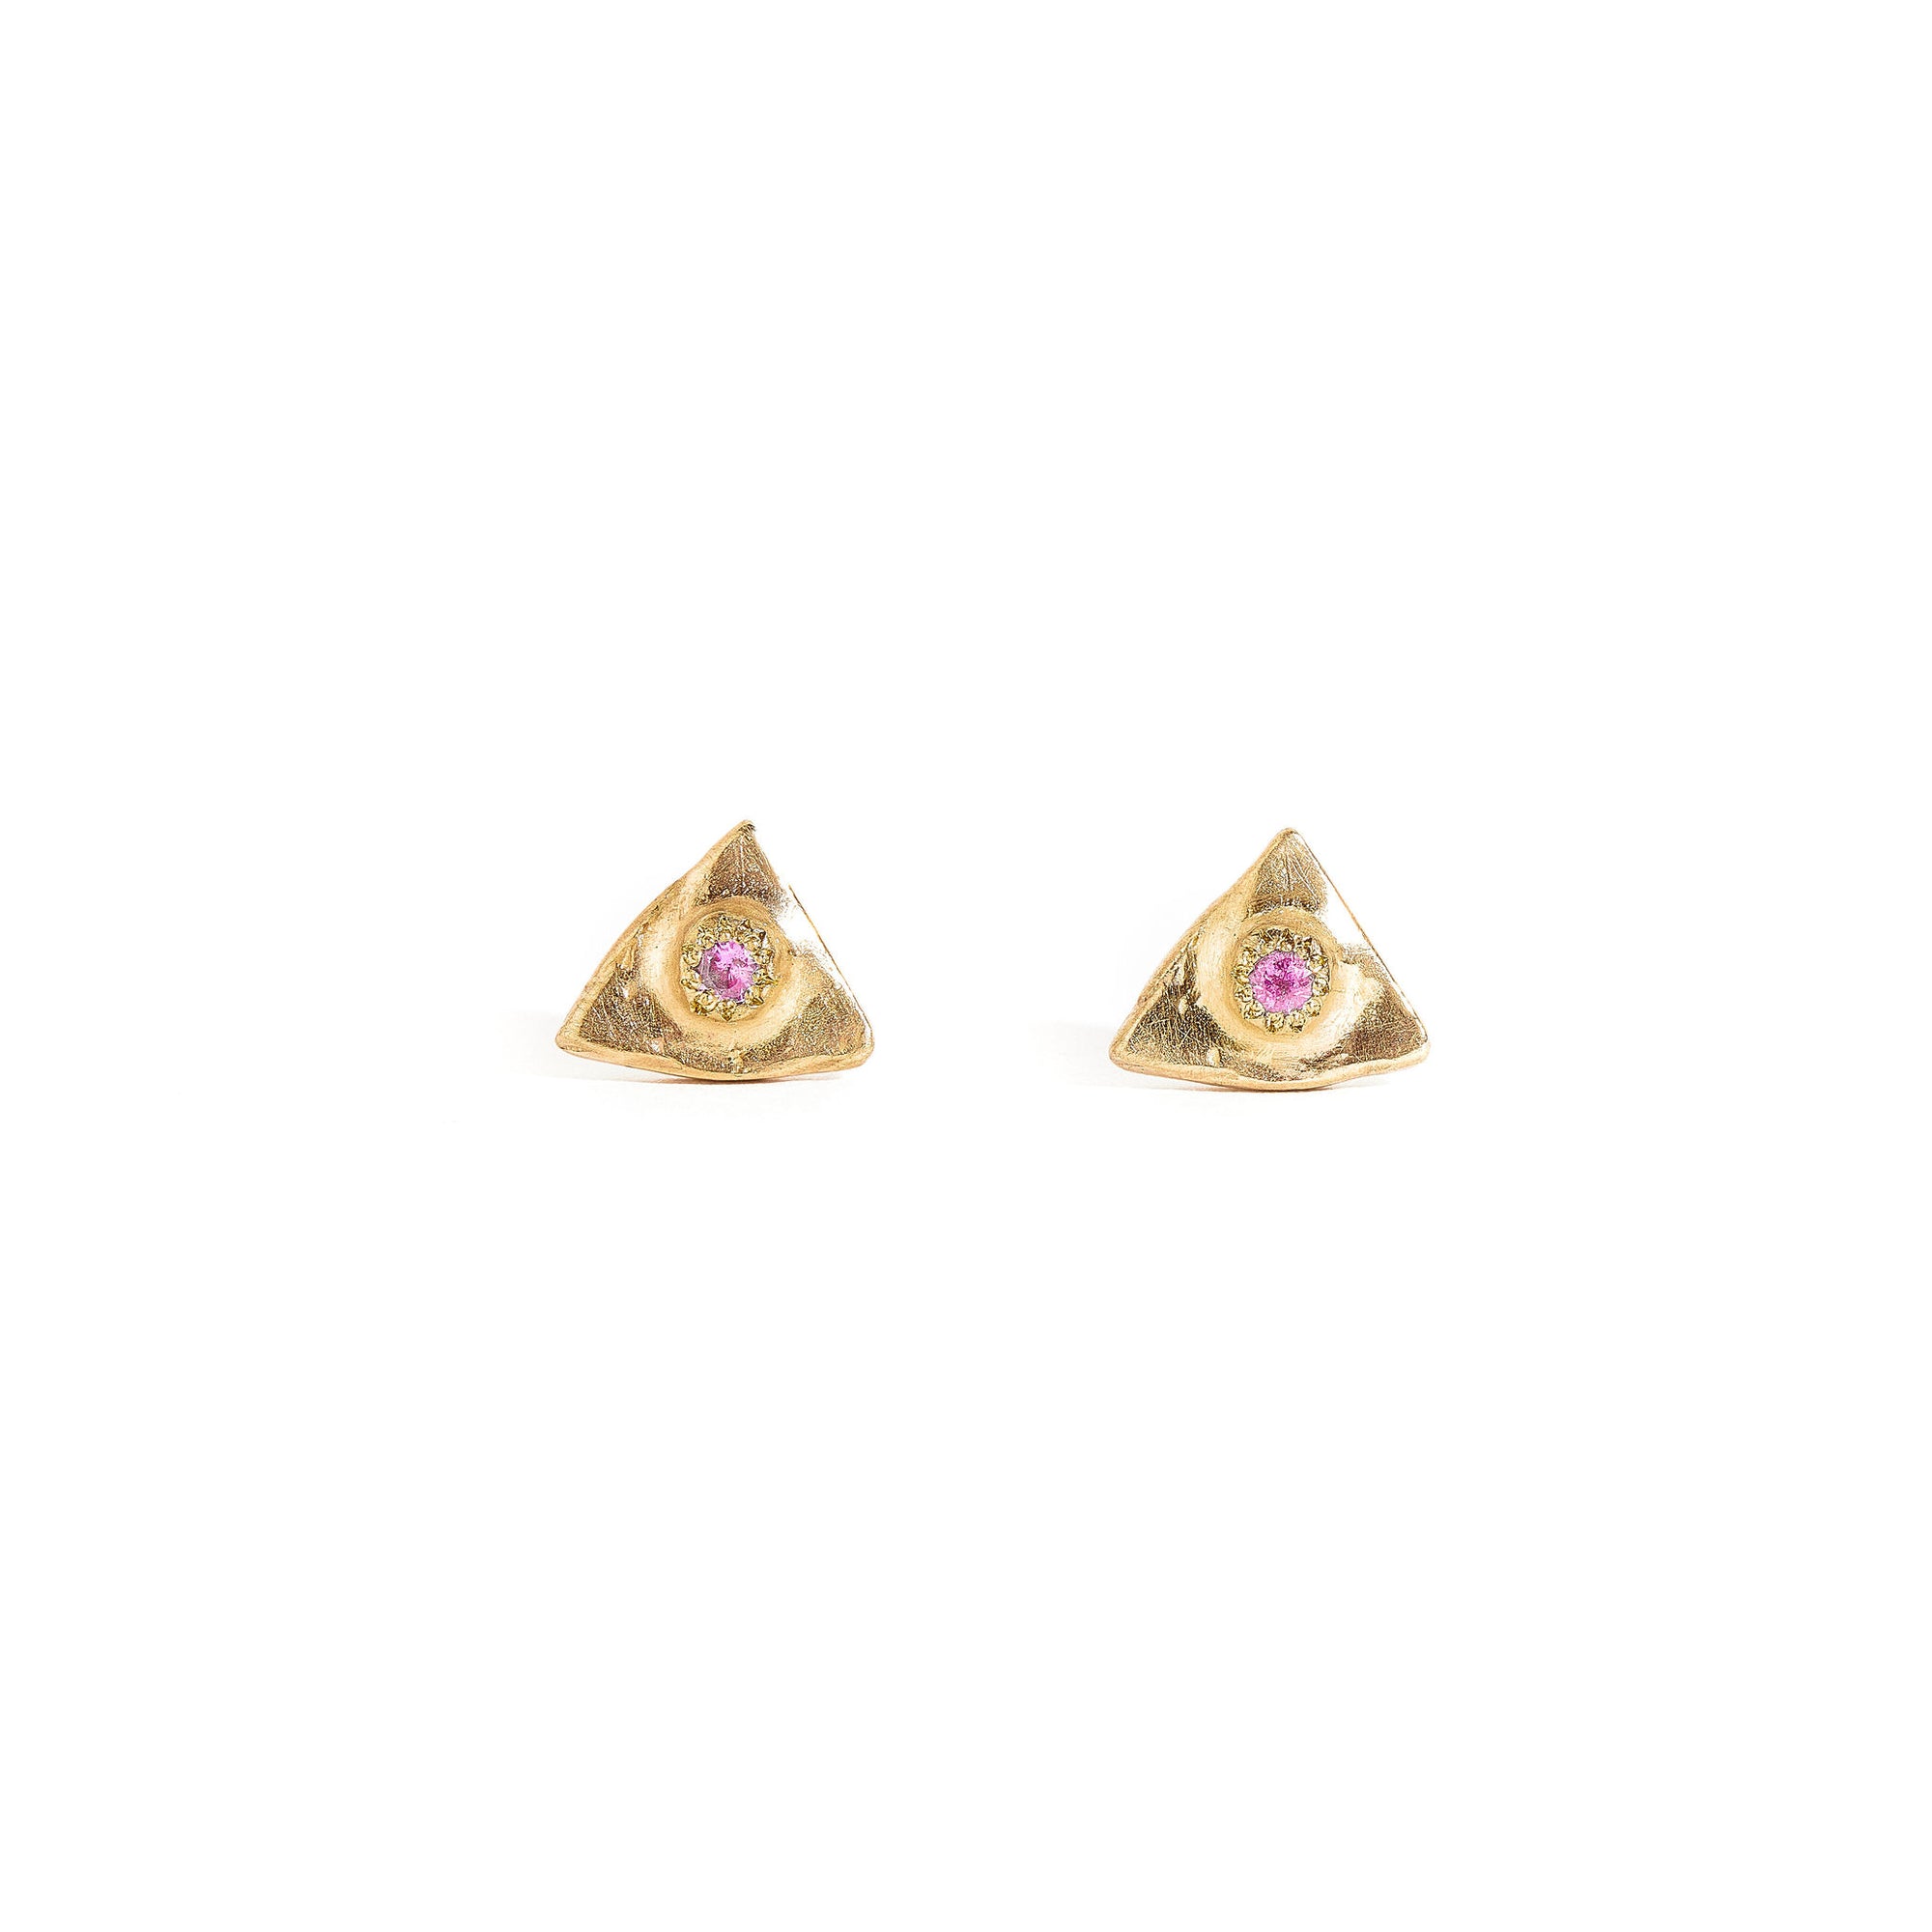  9 carat yellow gold studs set with a pink sapphire. 